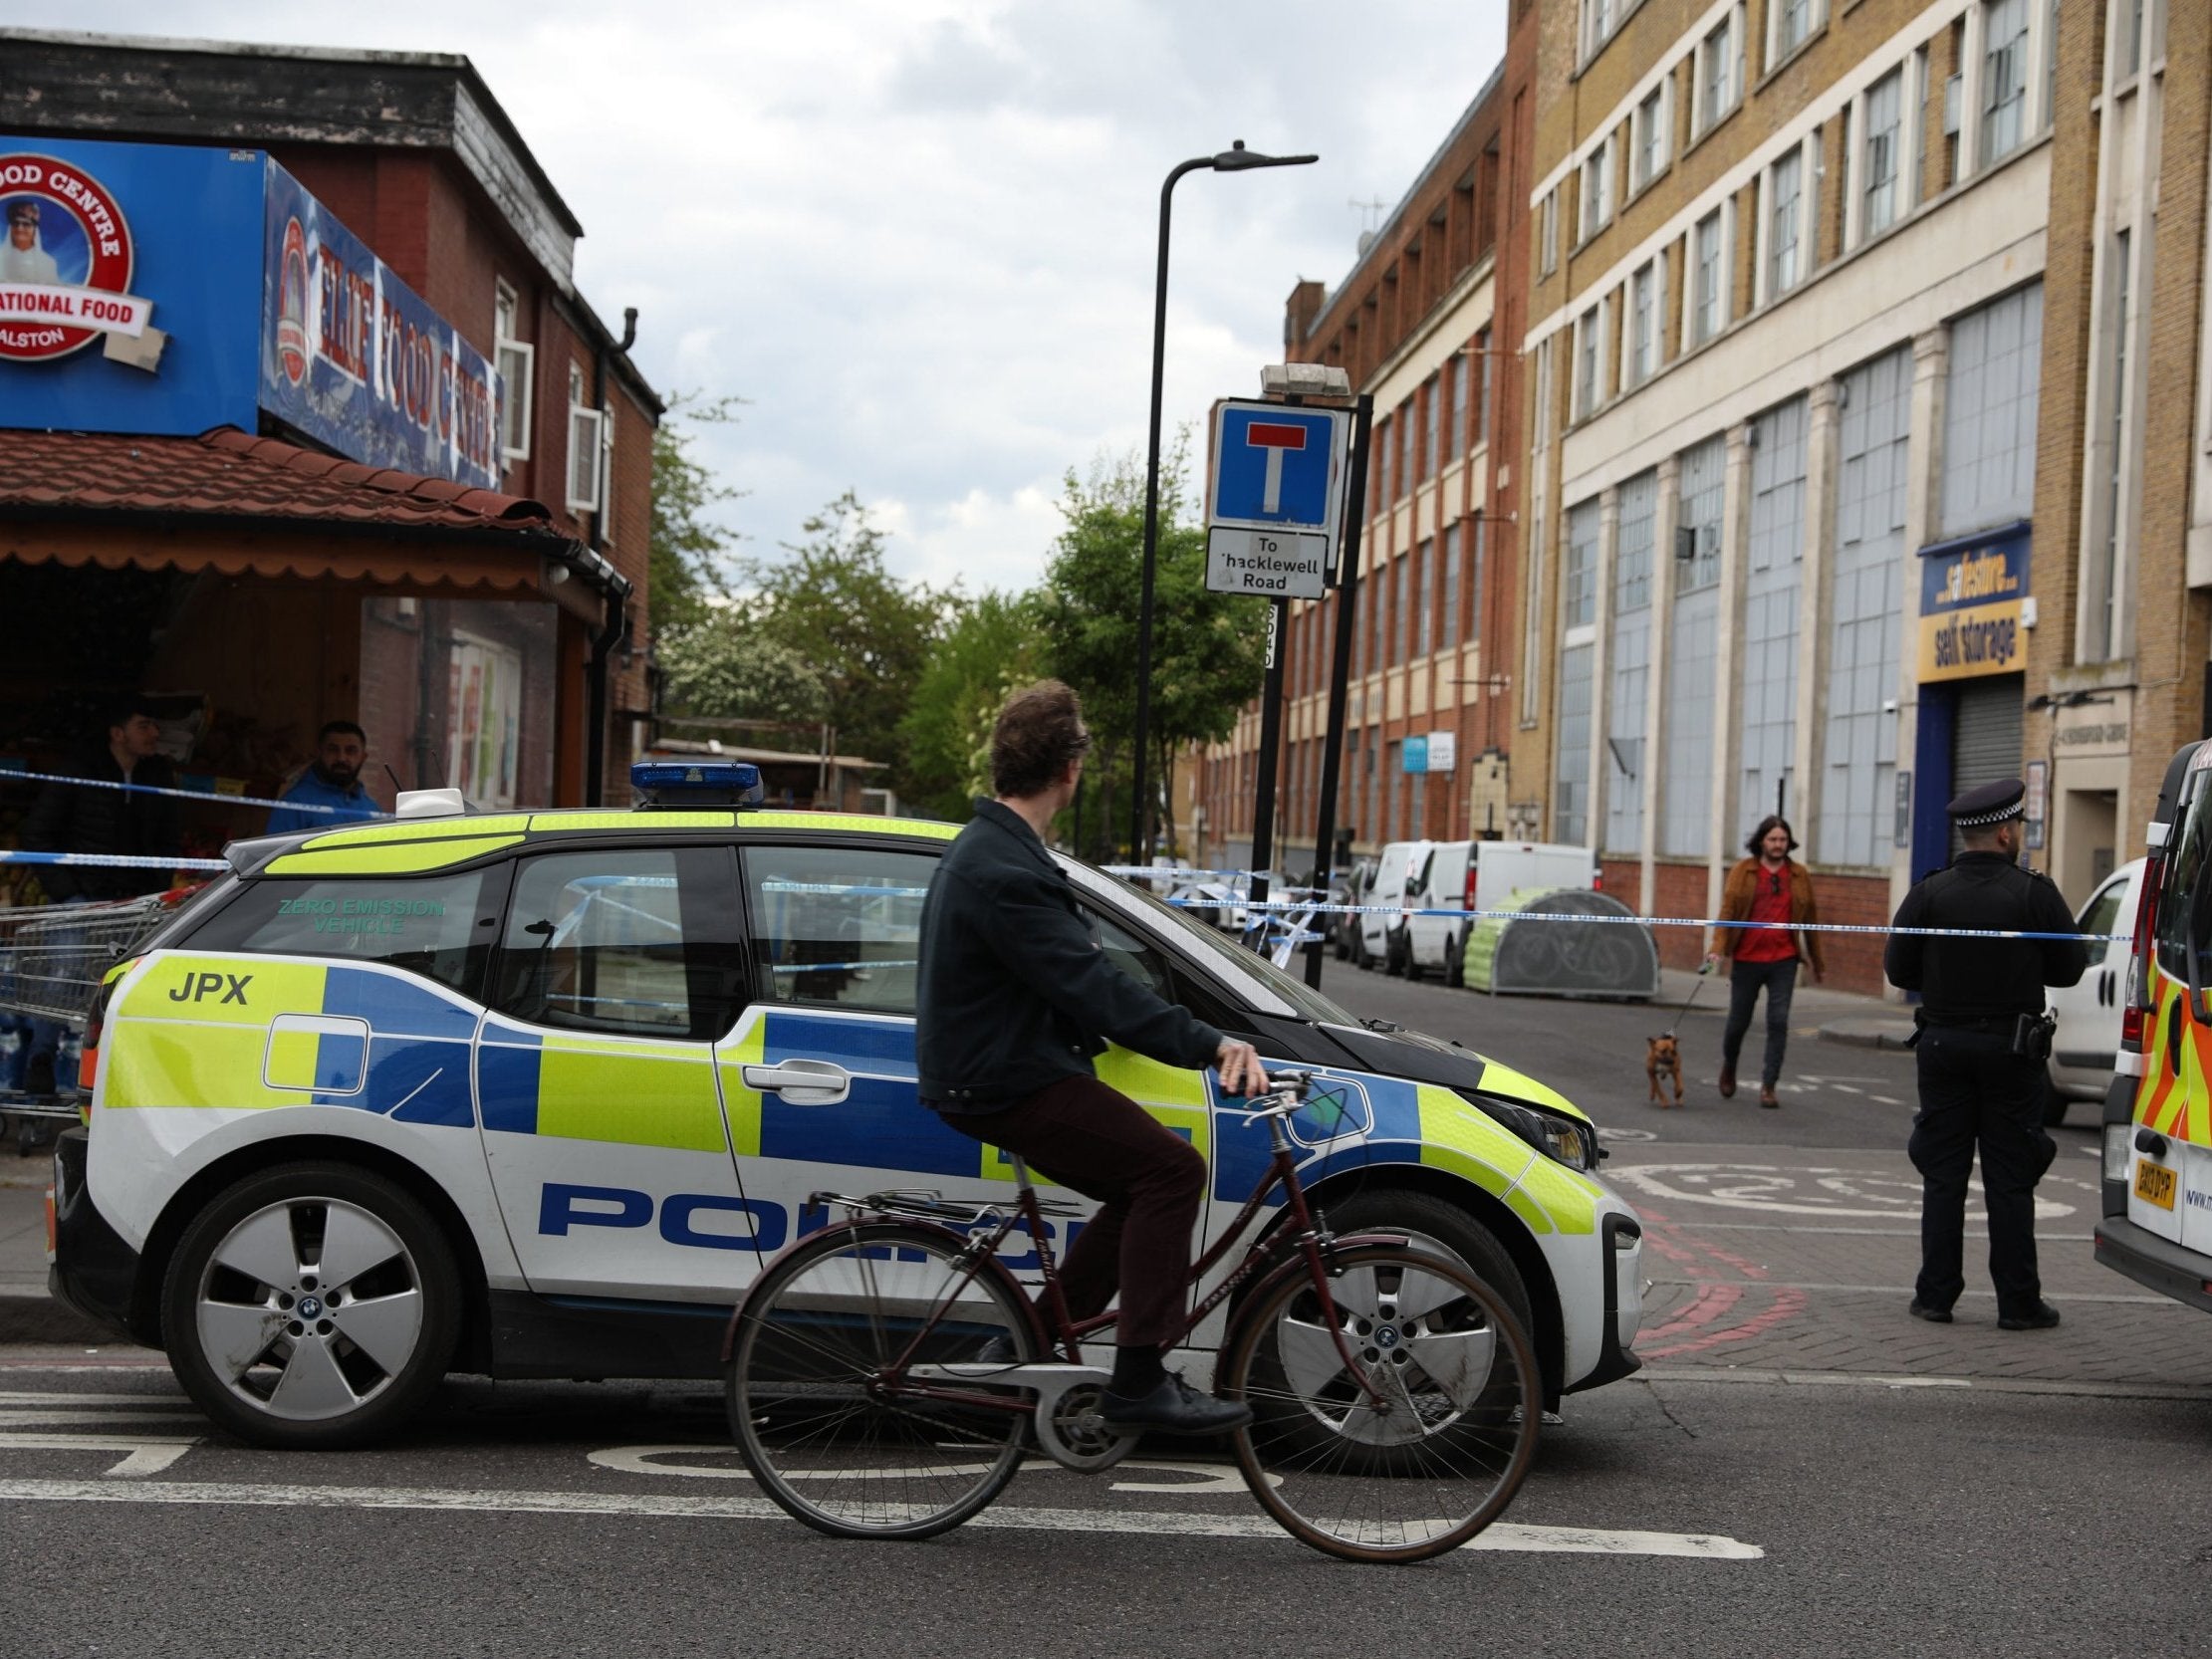 A police cordon in Hackney, east London, where a 15-year-old boy was stabbed to death on 1 May